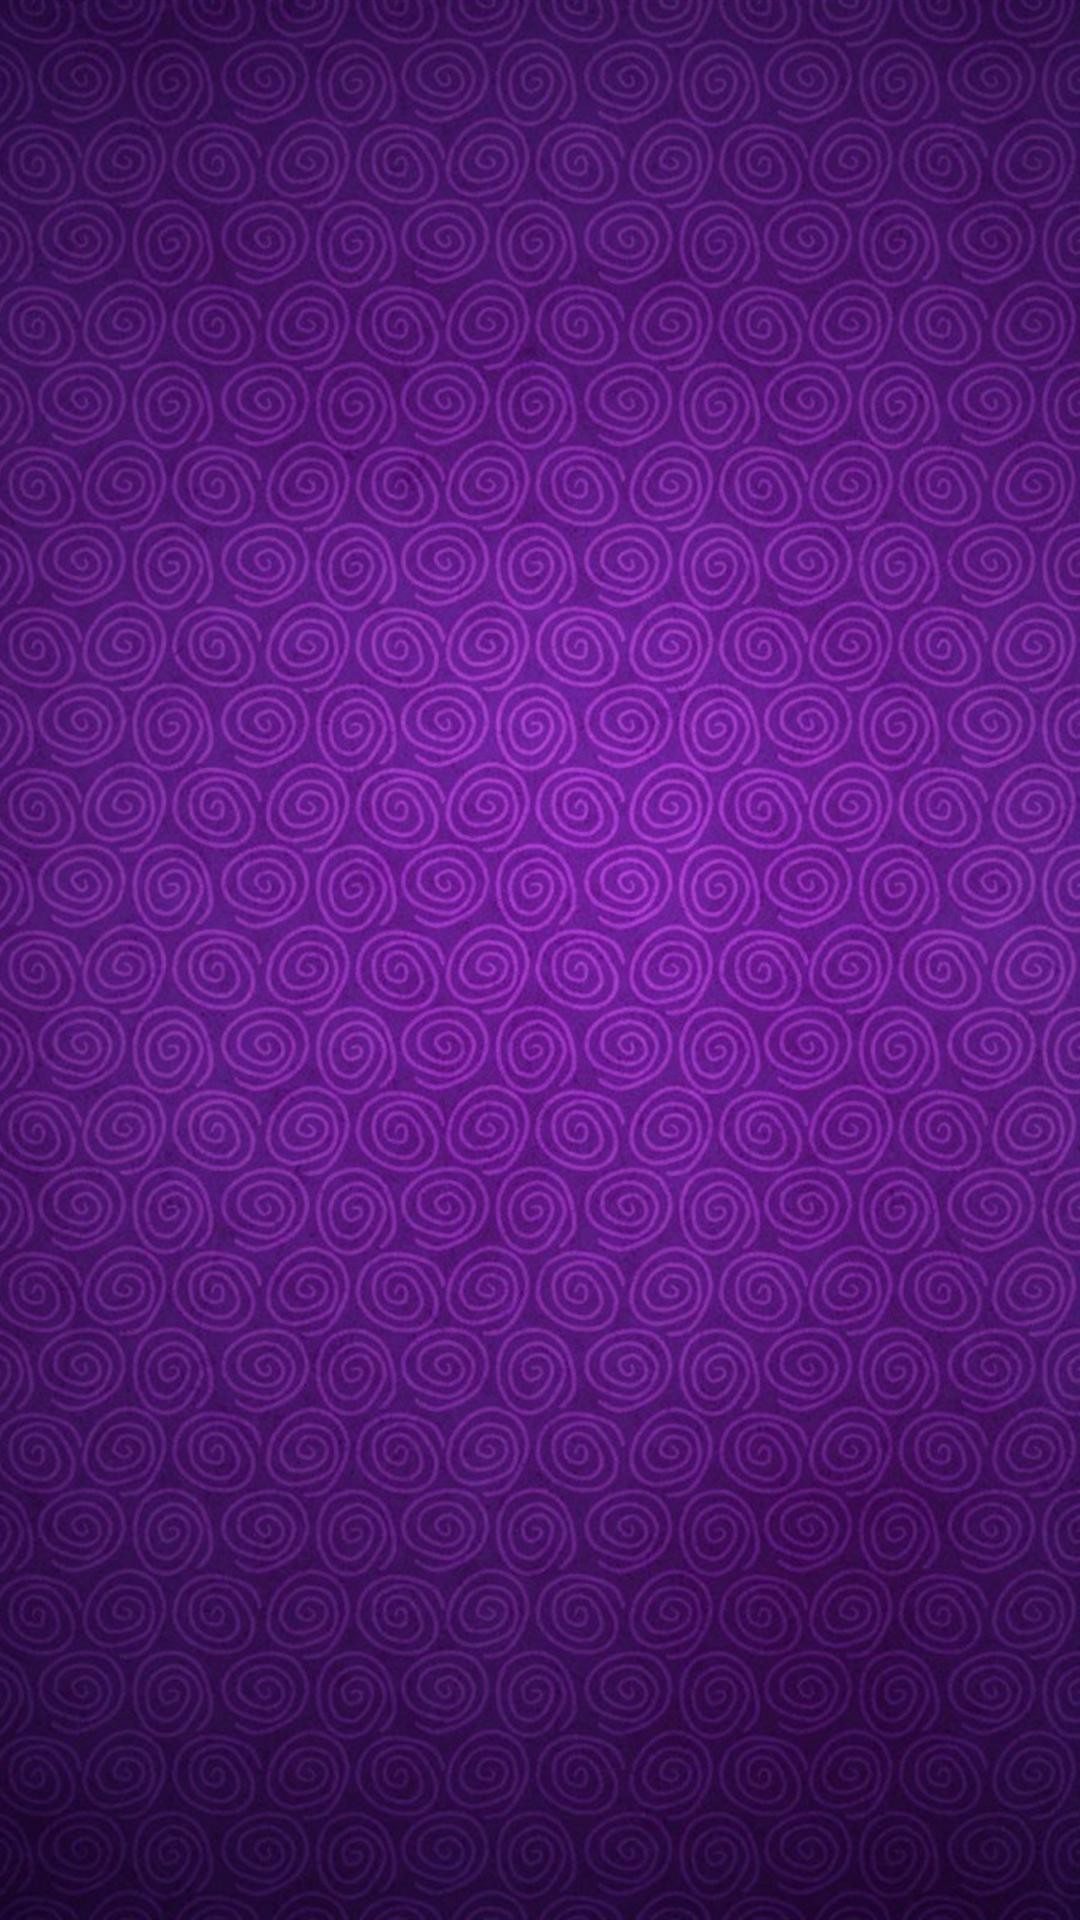 1080x1920 download spinning twisting dark purple wallpapers for iphone 6 plus :